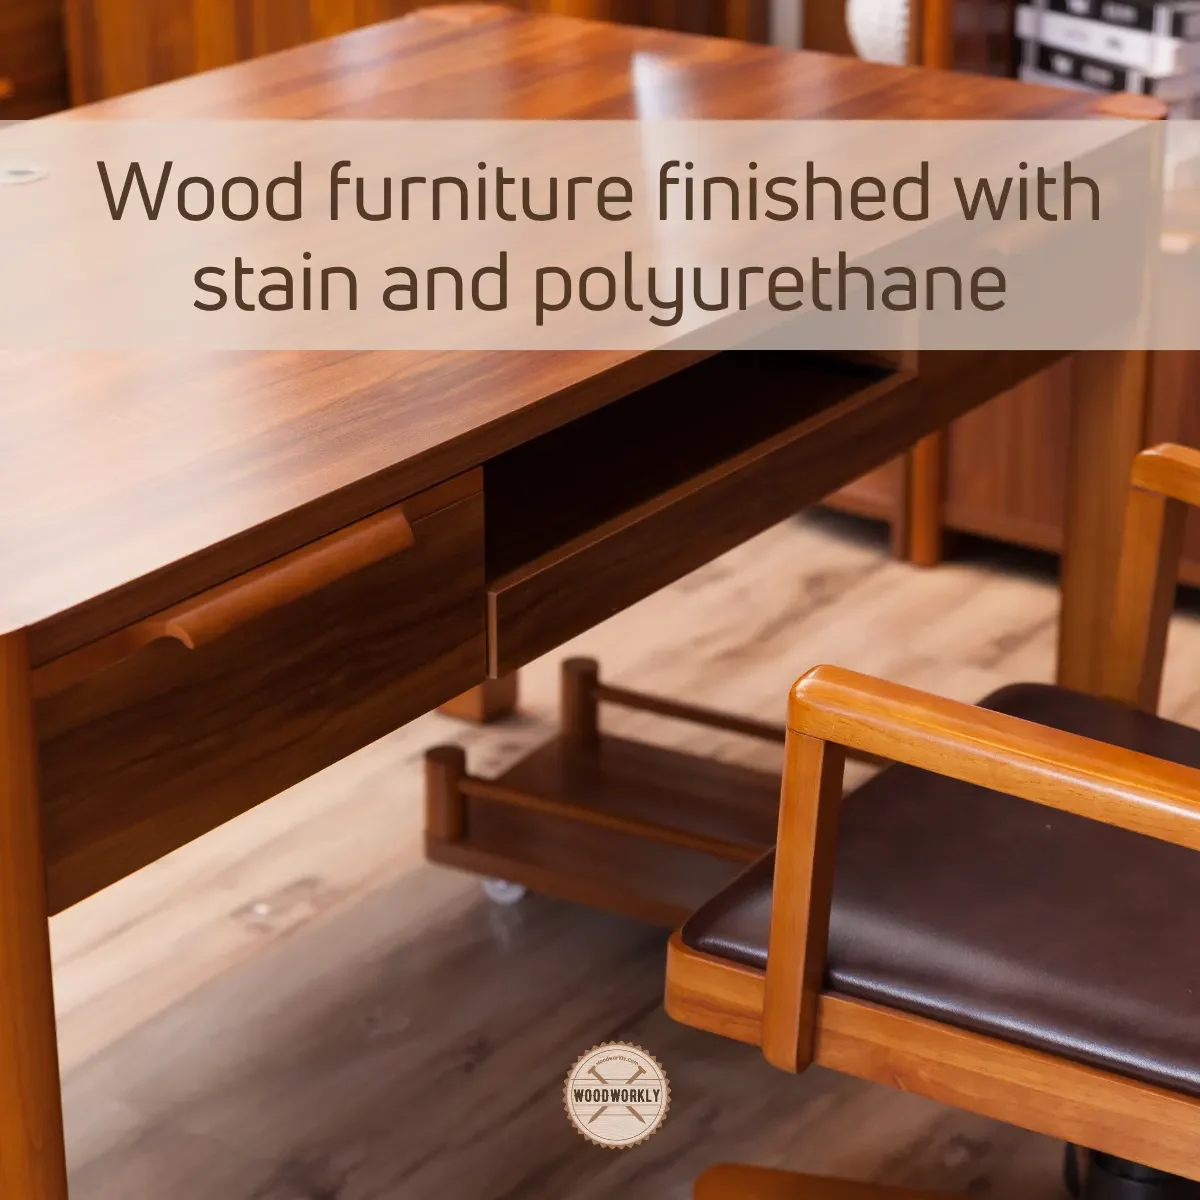 wood furniture finished with stain and polyurethane